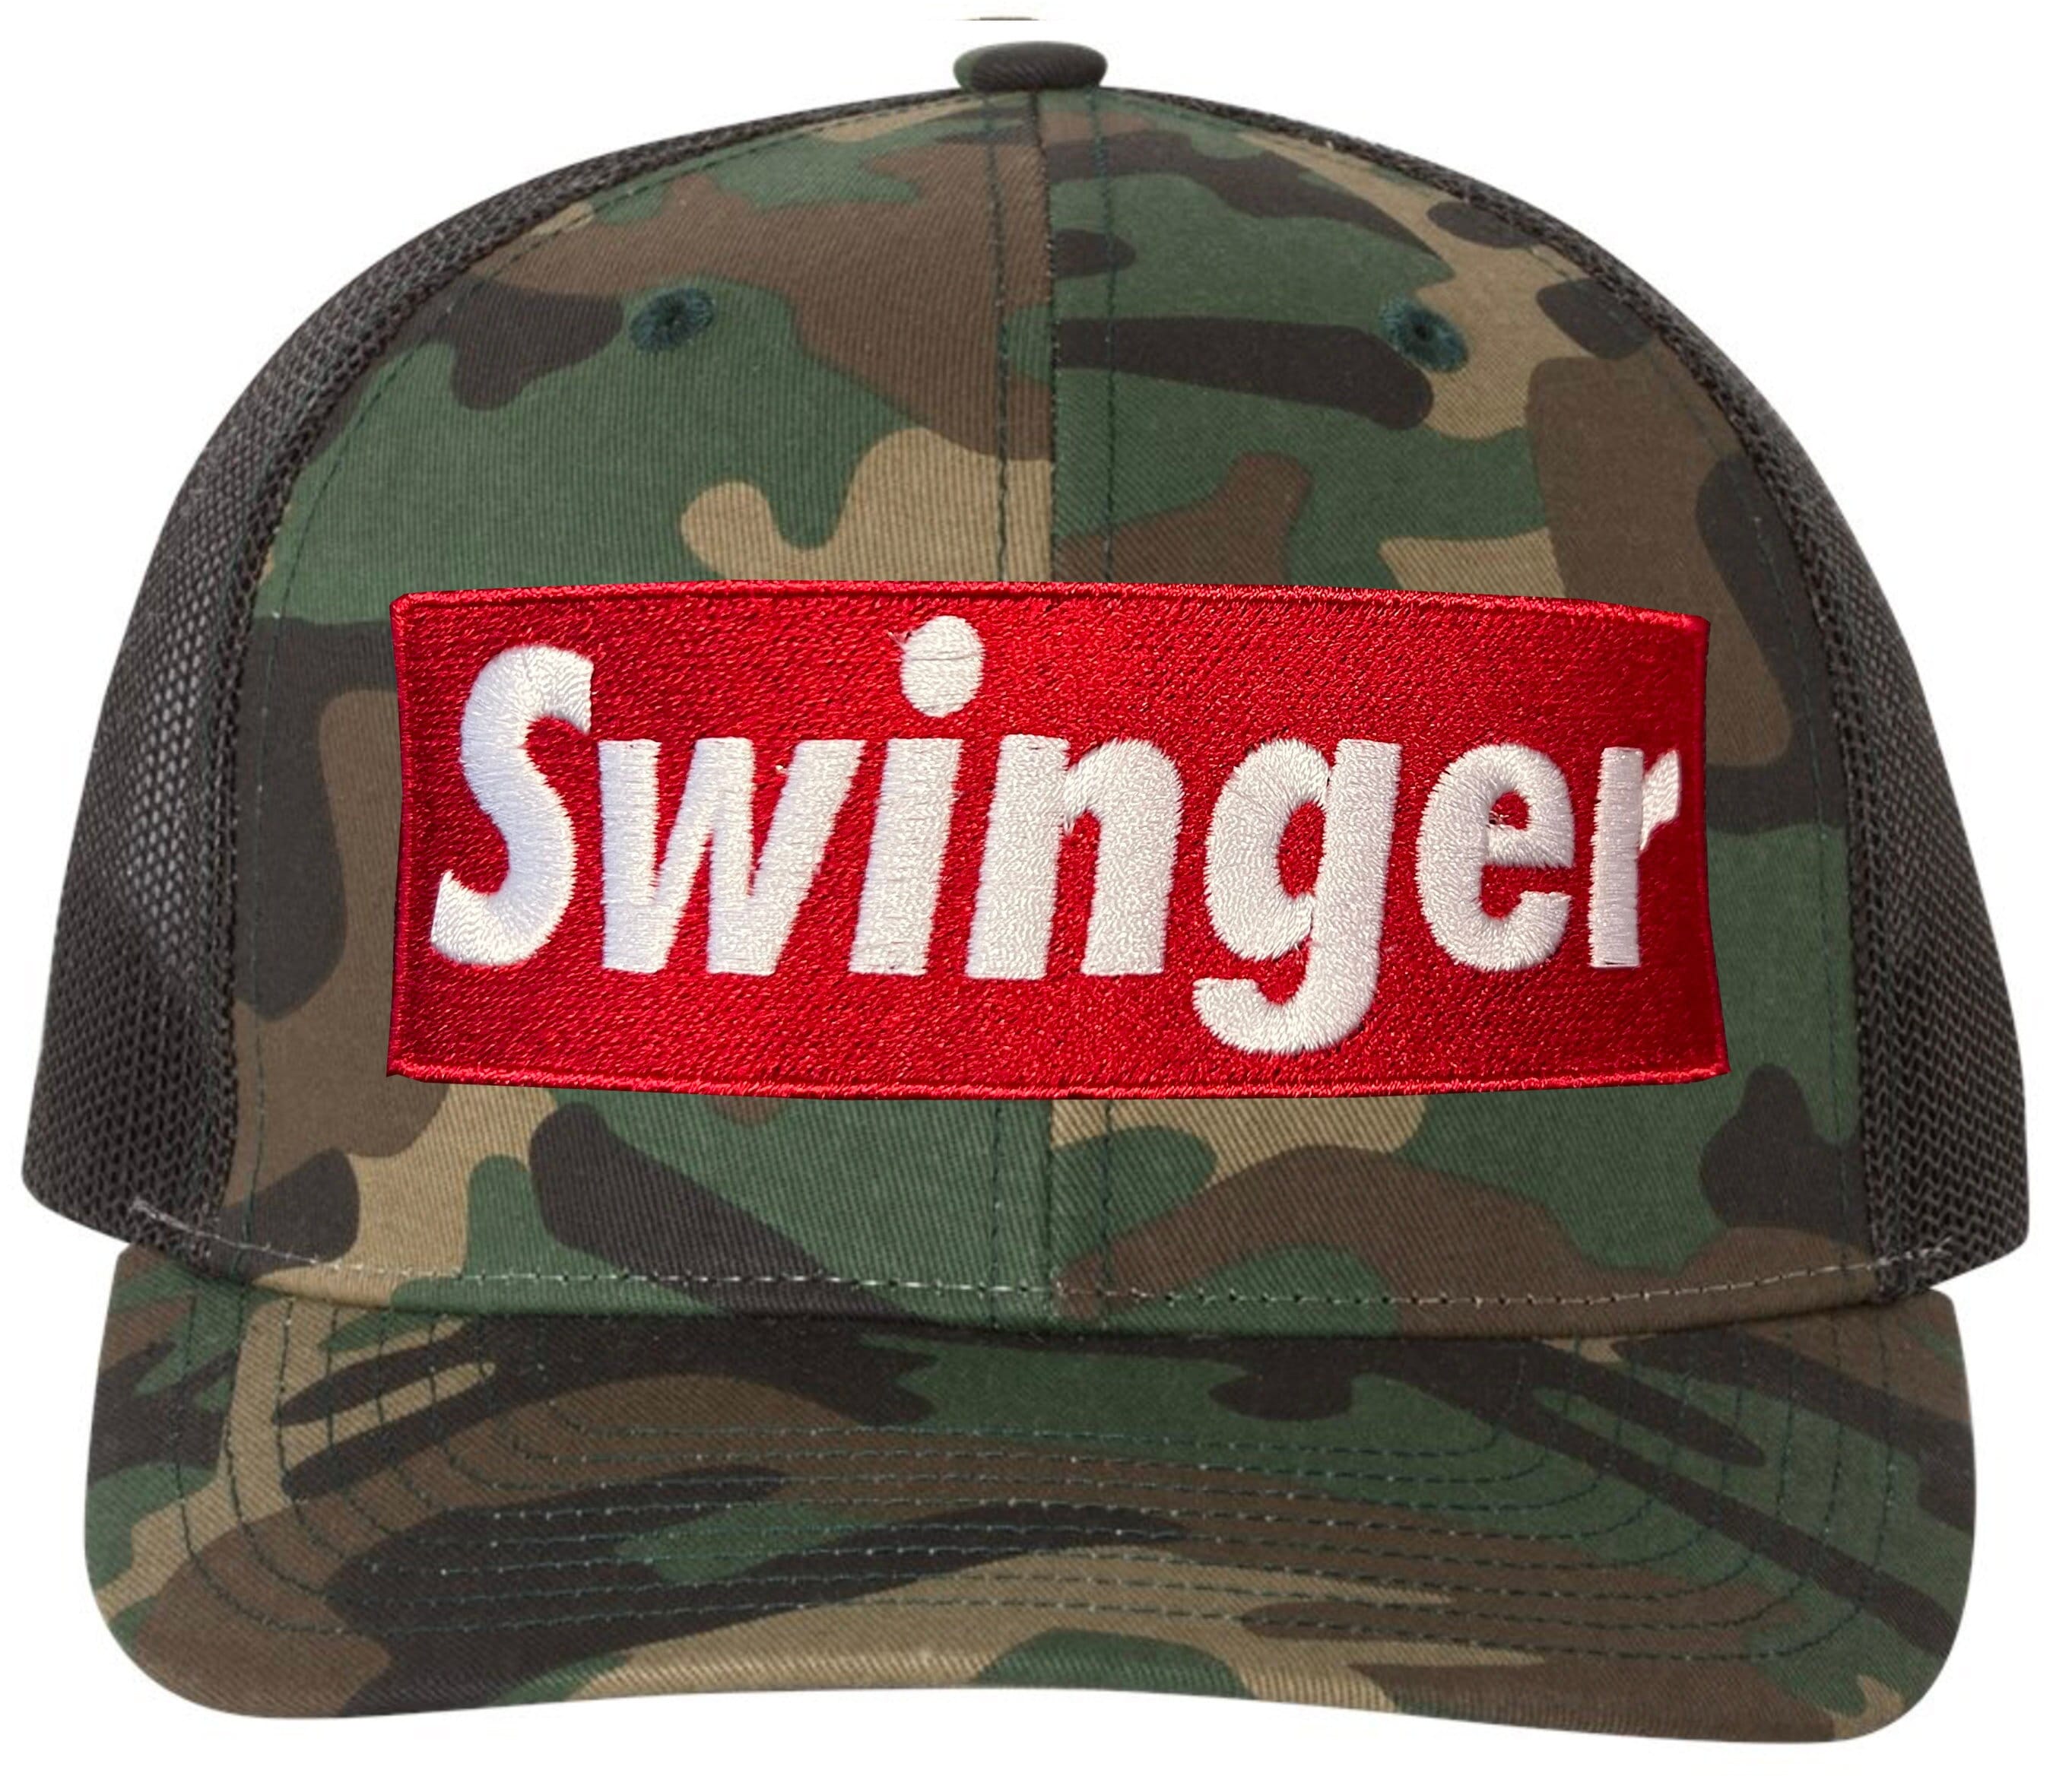 Embroidered SWINGER Camo Hat Adult Mature Hat pic